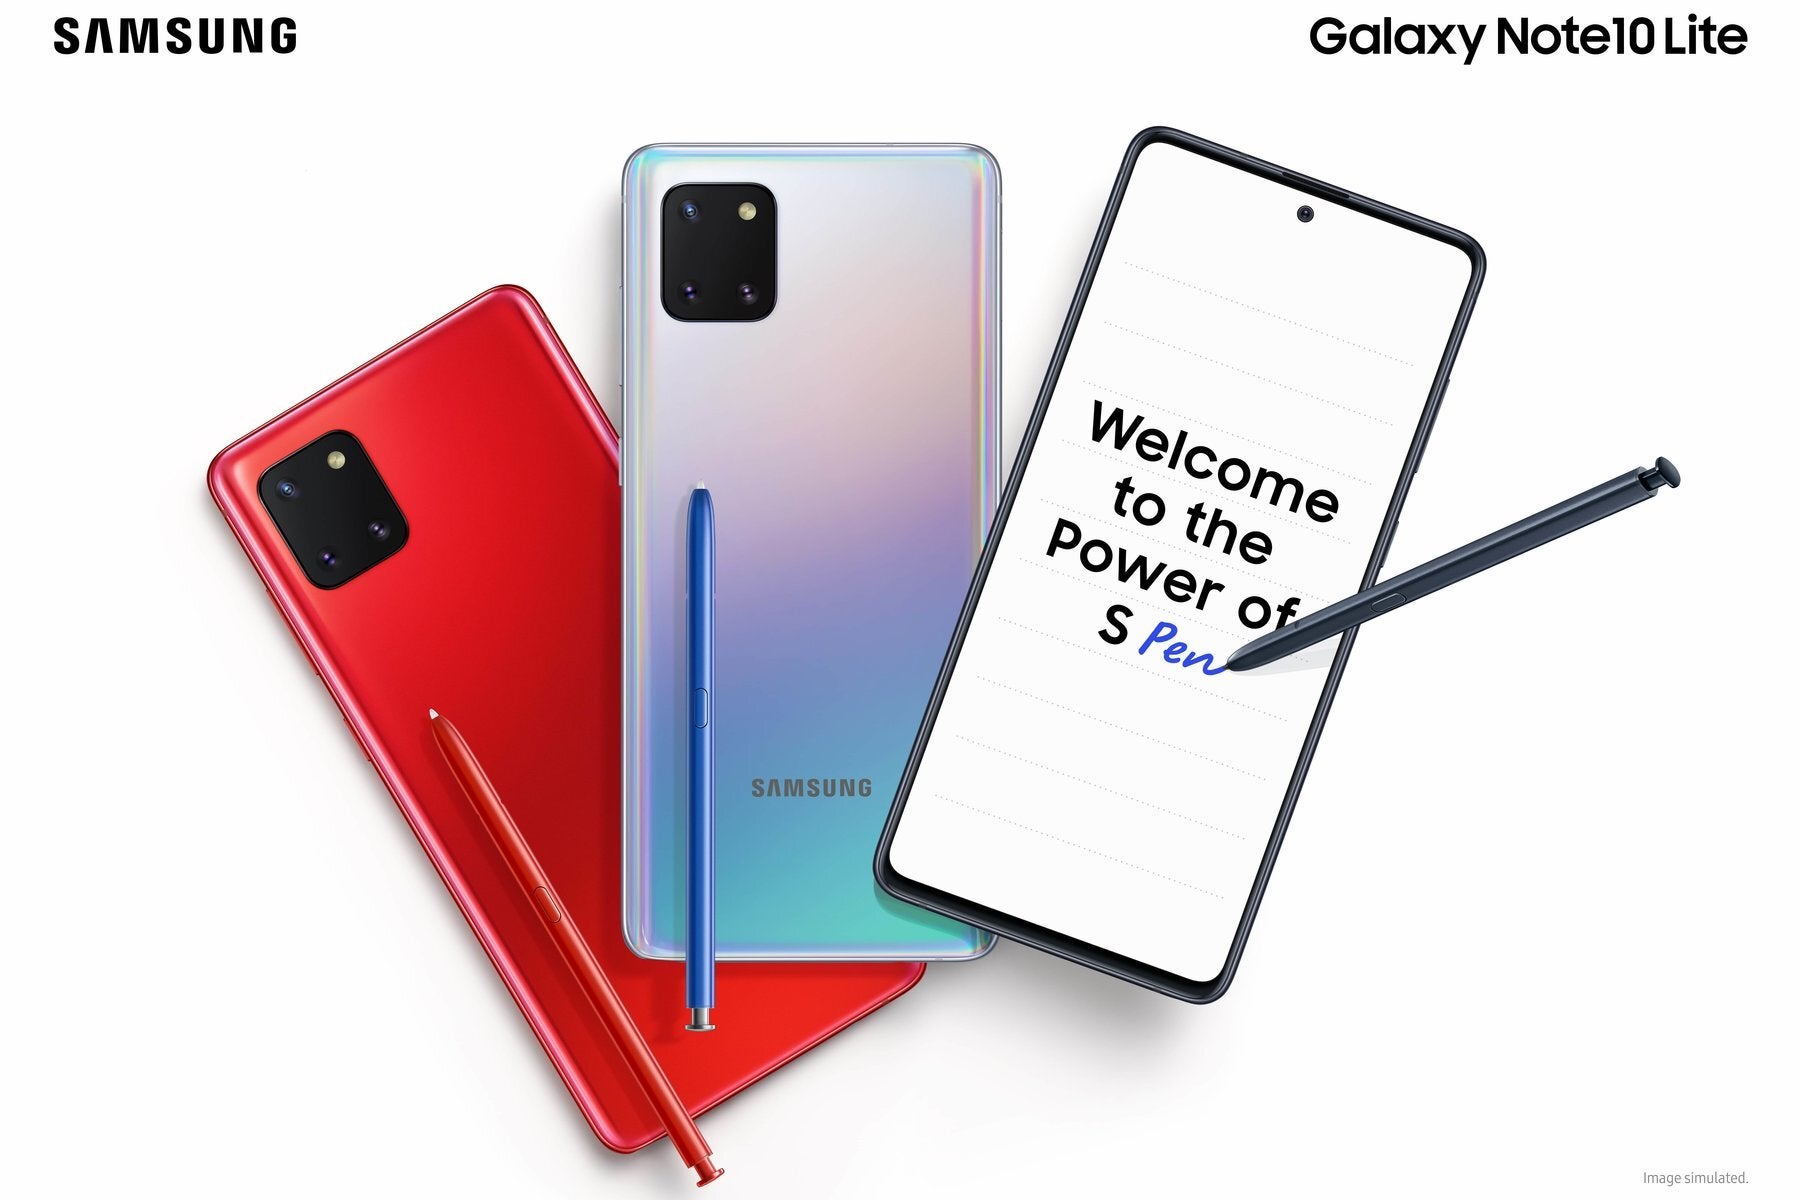 Samsung Galaxy Note 10 Lite - Samsung Galaxy S10 Lite & Note 10 Lite are official: premium features, lower prices